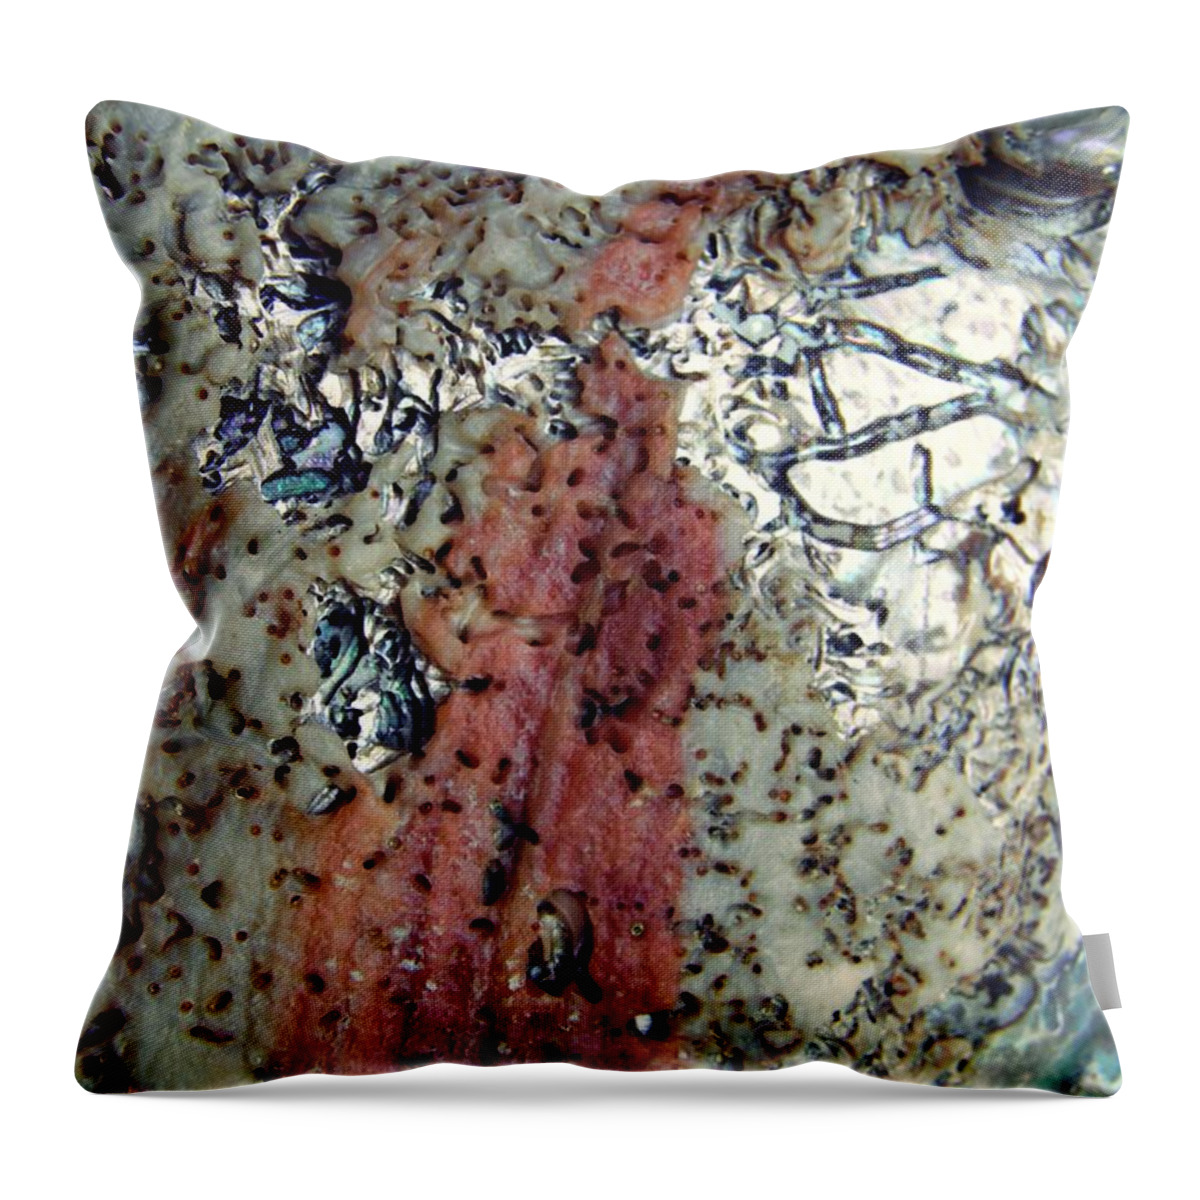 Abalone Throw Pillow featuring the photograph Abalone Shell Abstract 2 by Sarah Loft